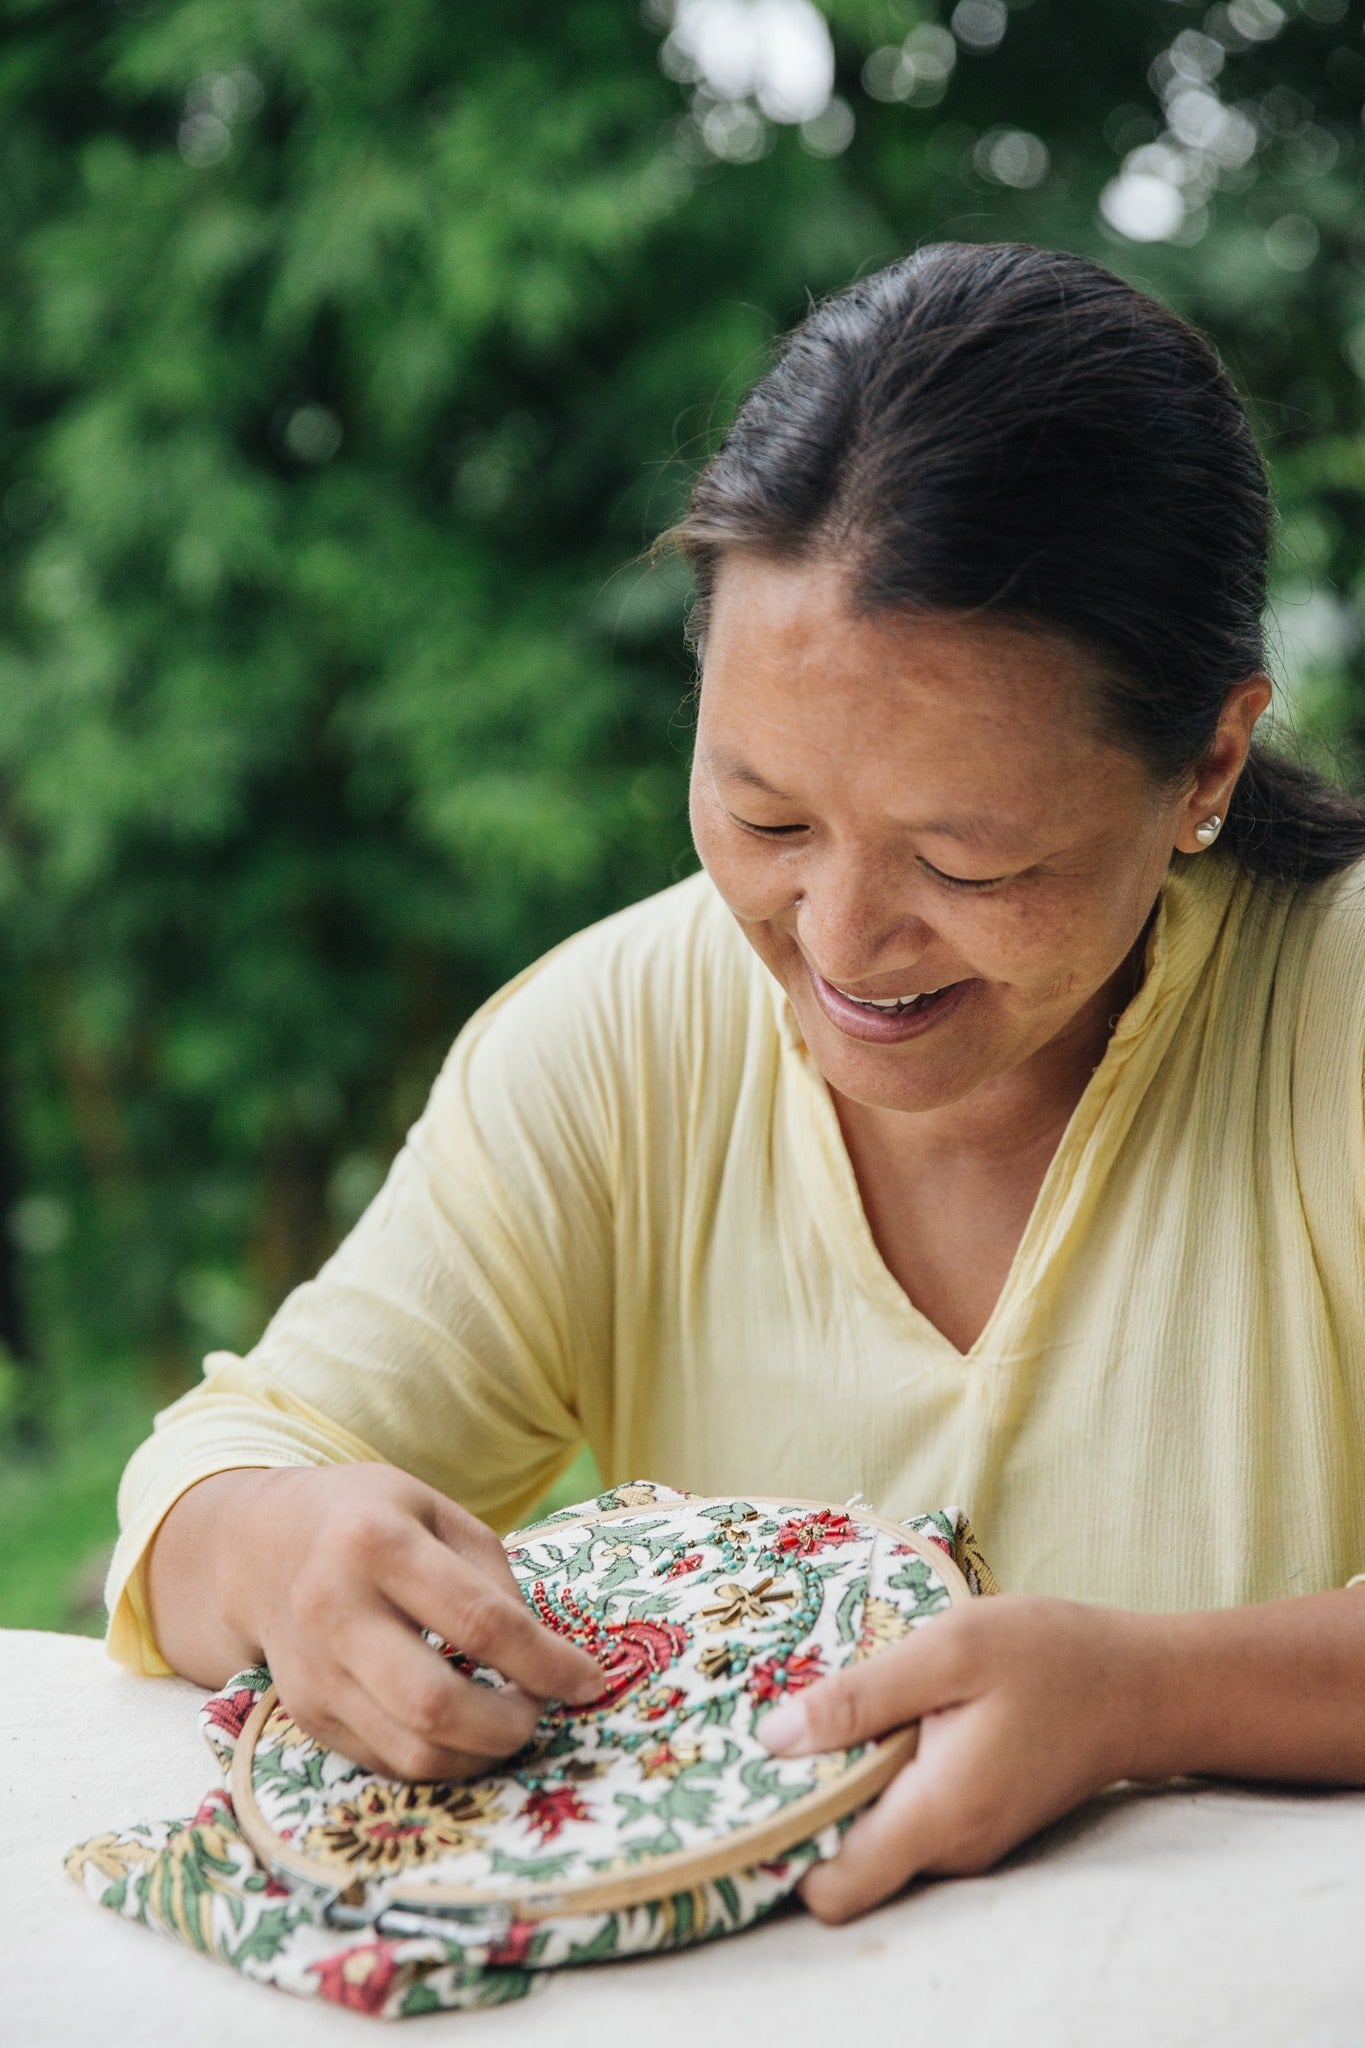 Her Story | Stories from our Women Artisans